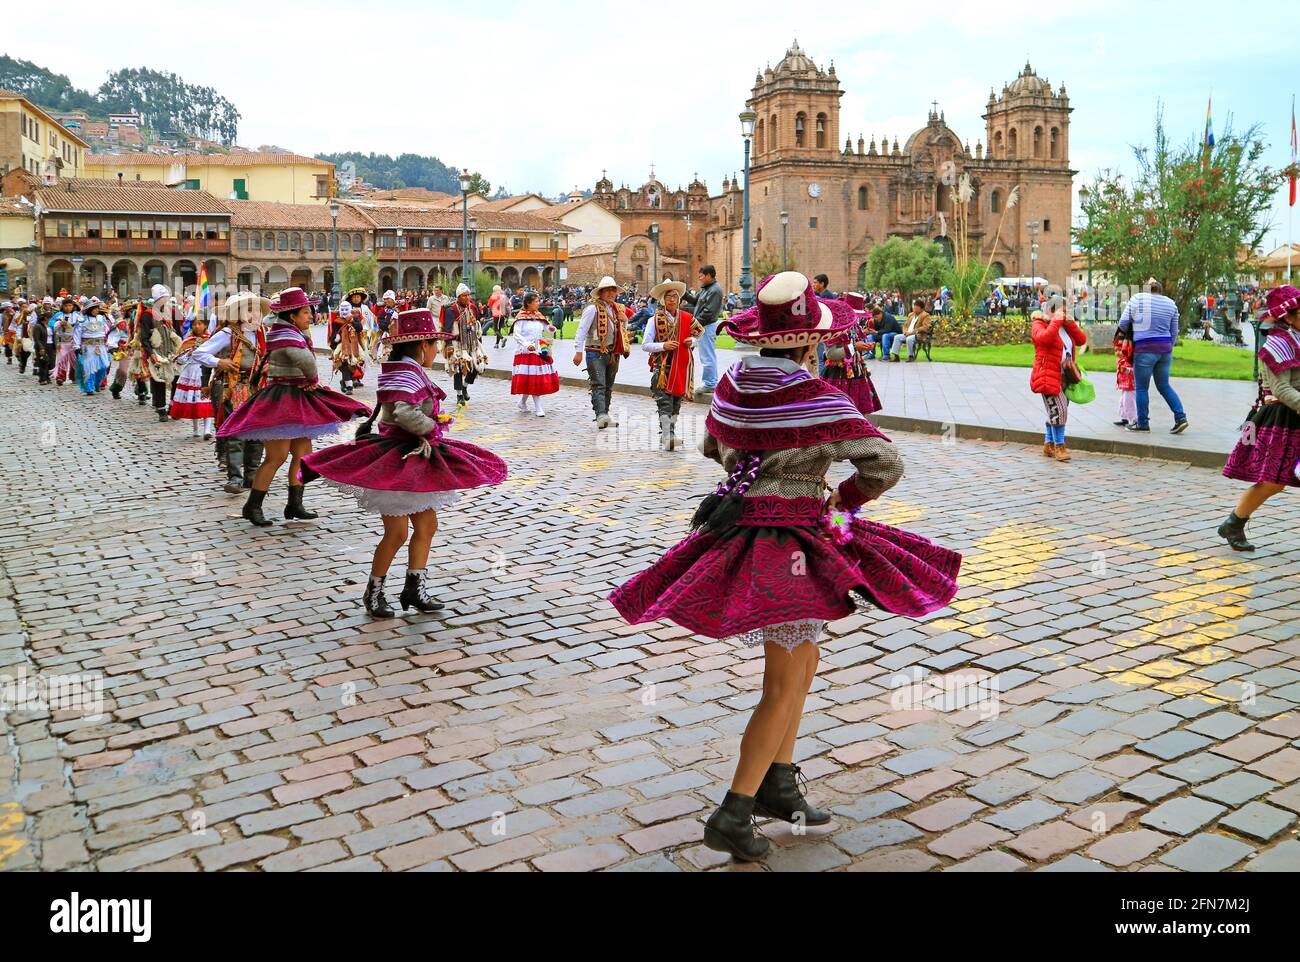 Parade of the Peruvian in Gorgeous Traditional Outfits Held on May 6th, 2018 on Plaza de Armas, Cusco, Peru Stock Photo